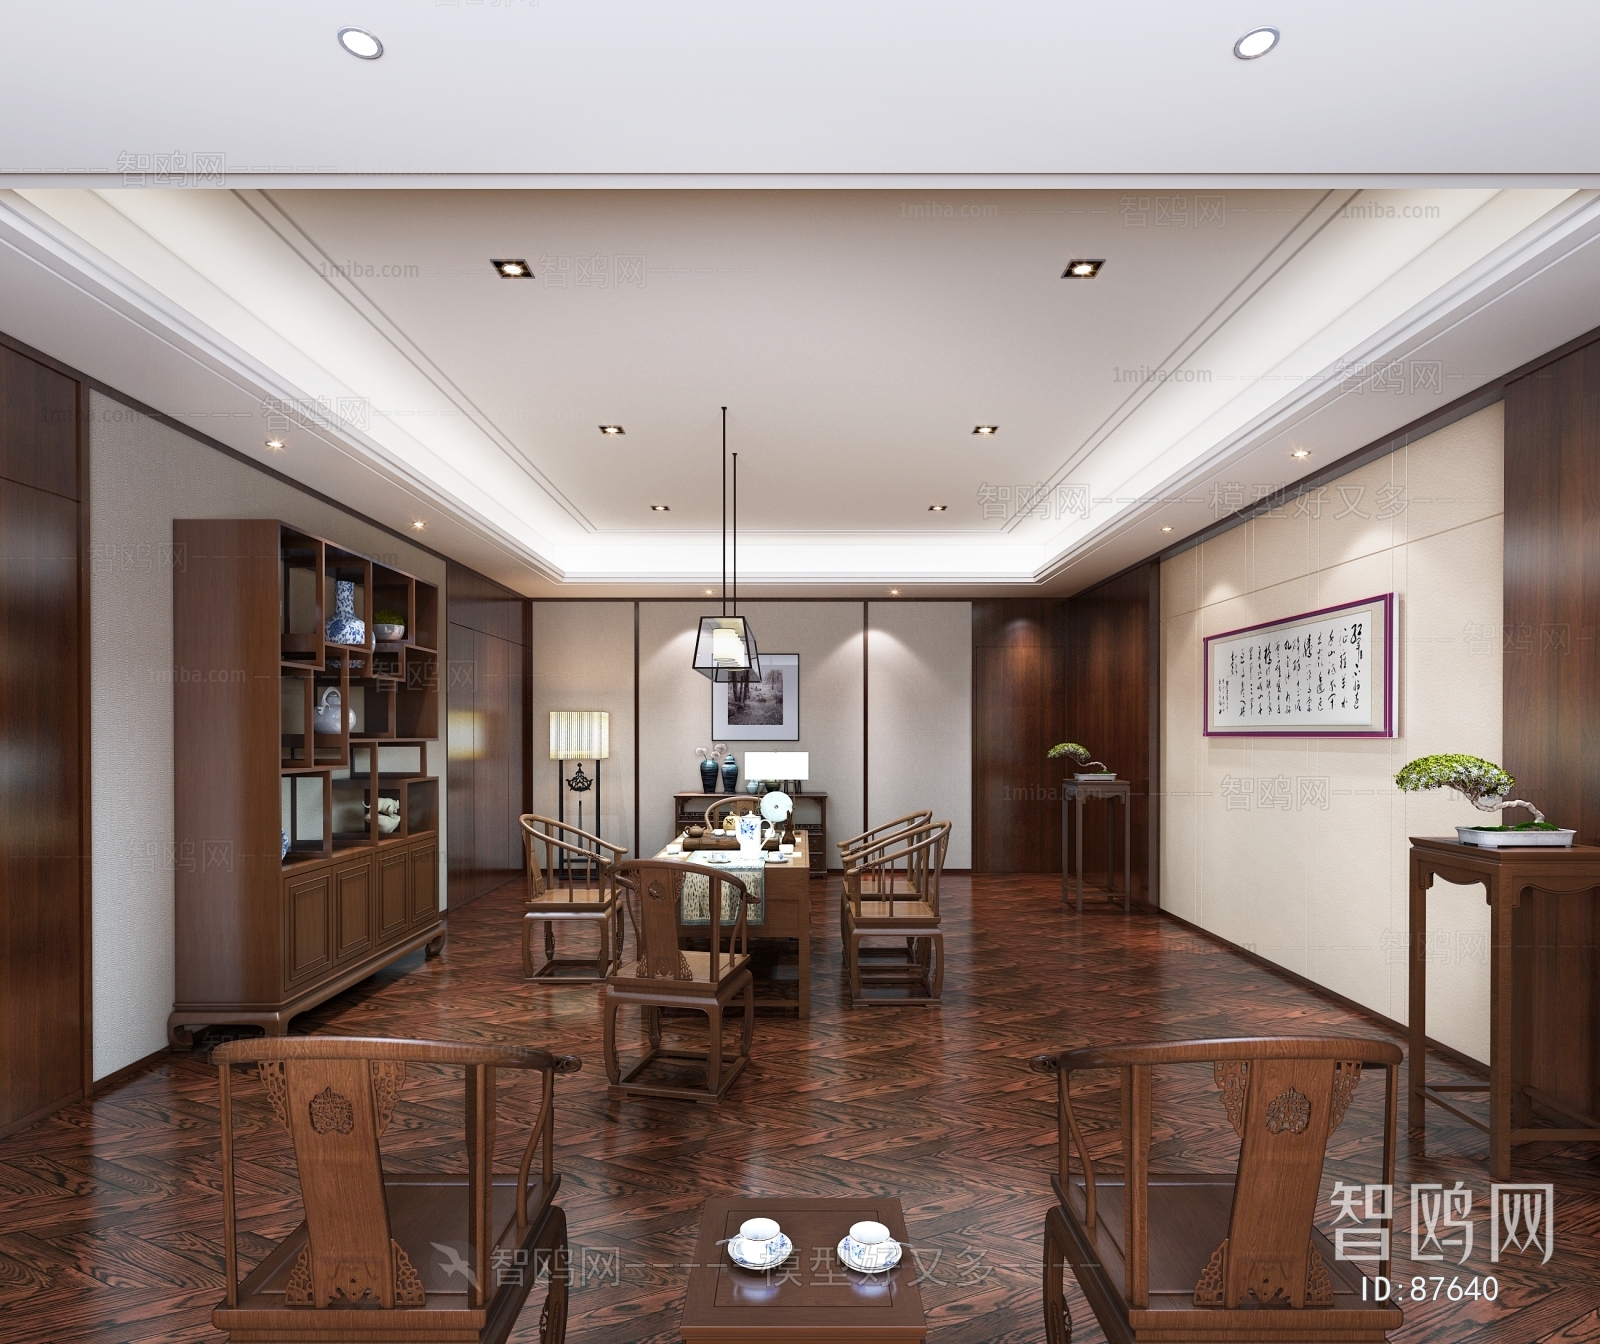 New Chinese Style Office Tea Room